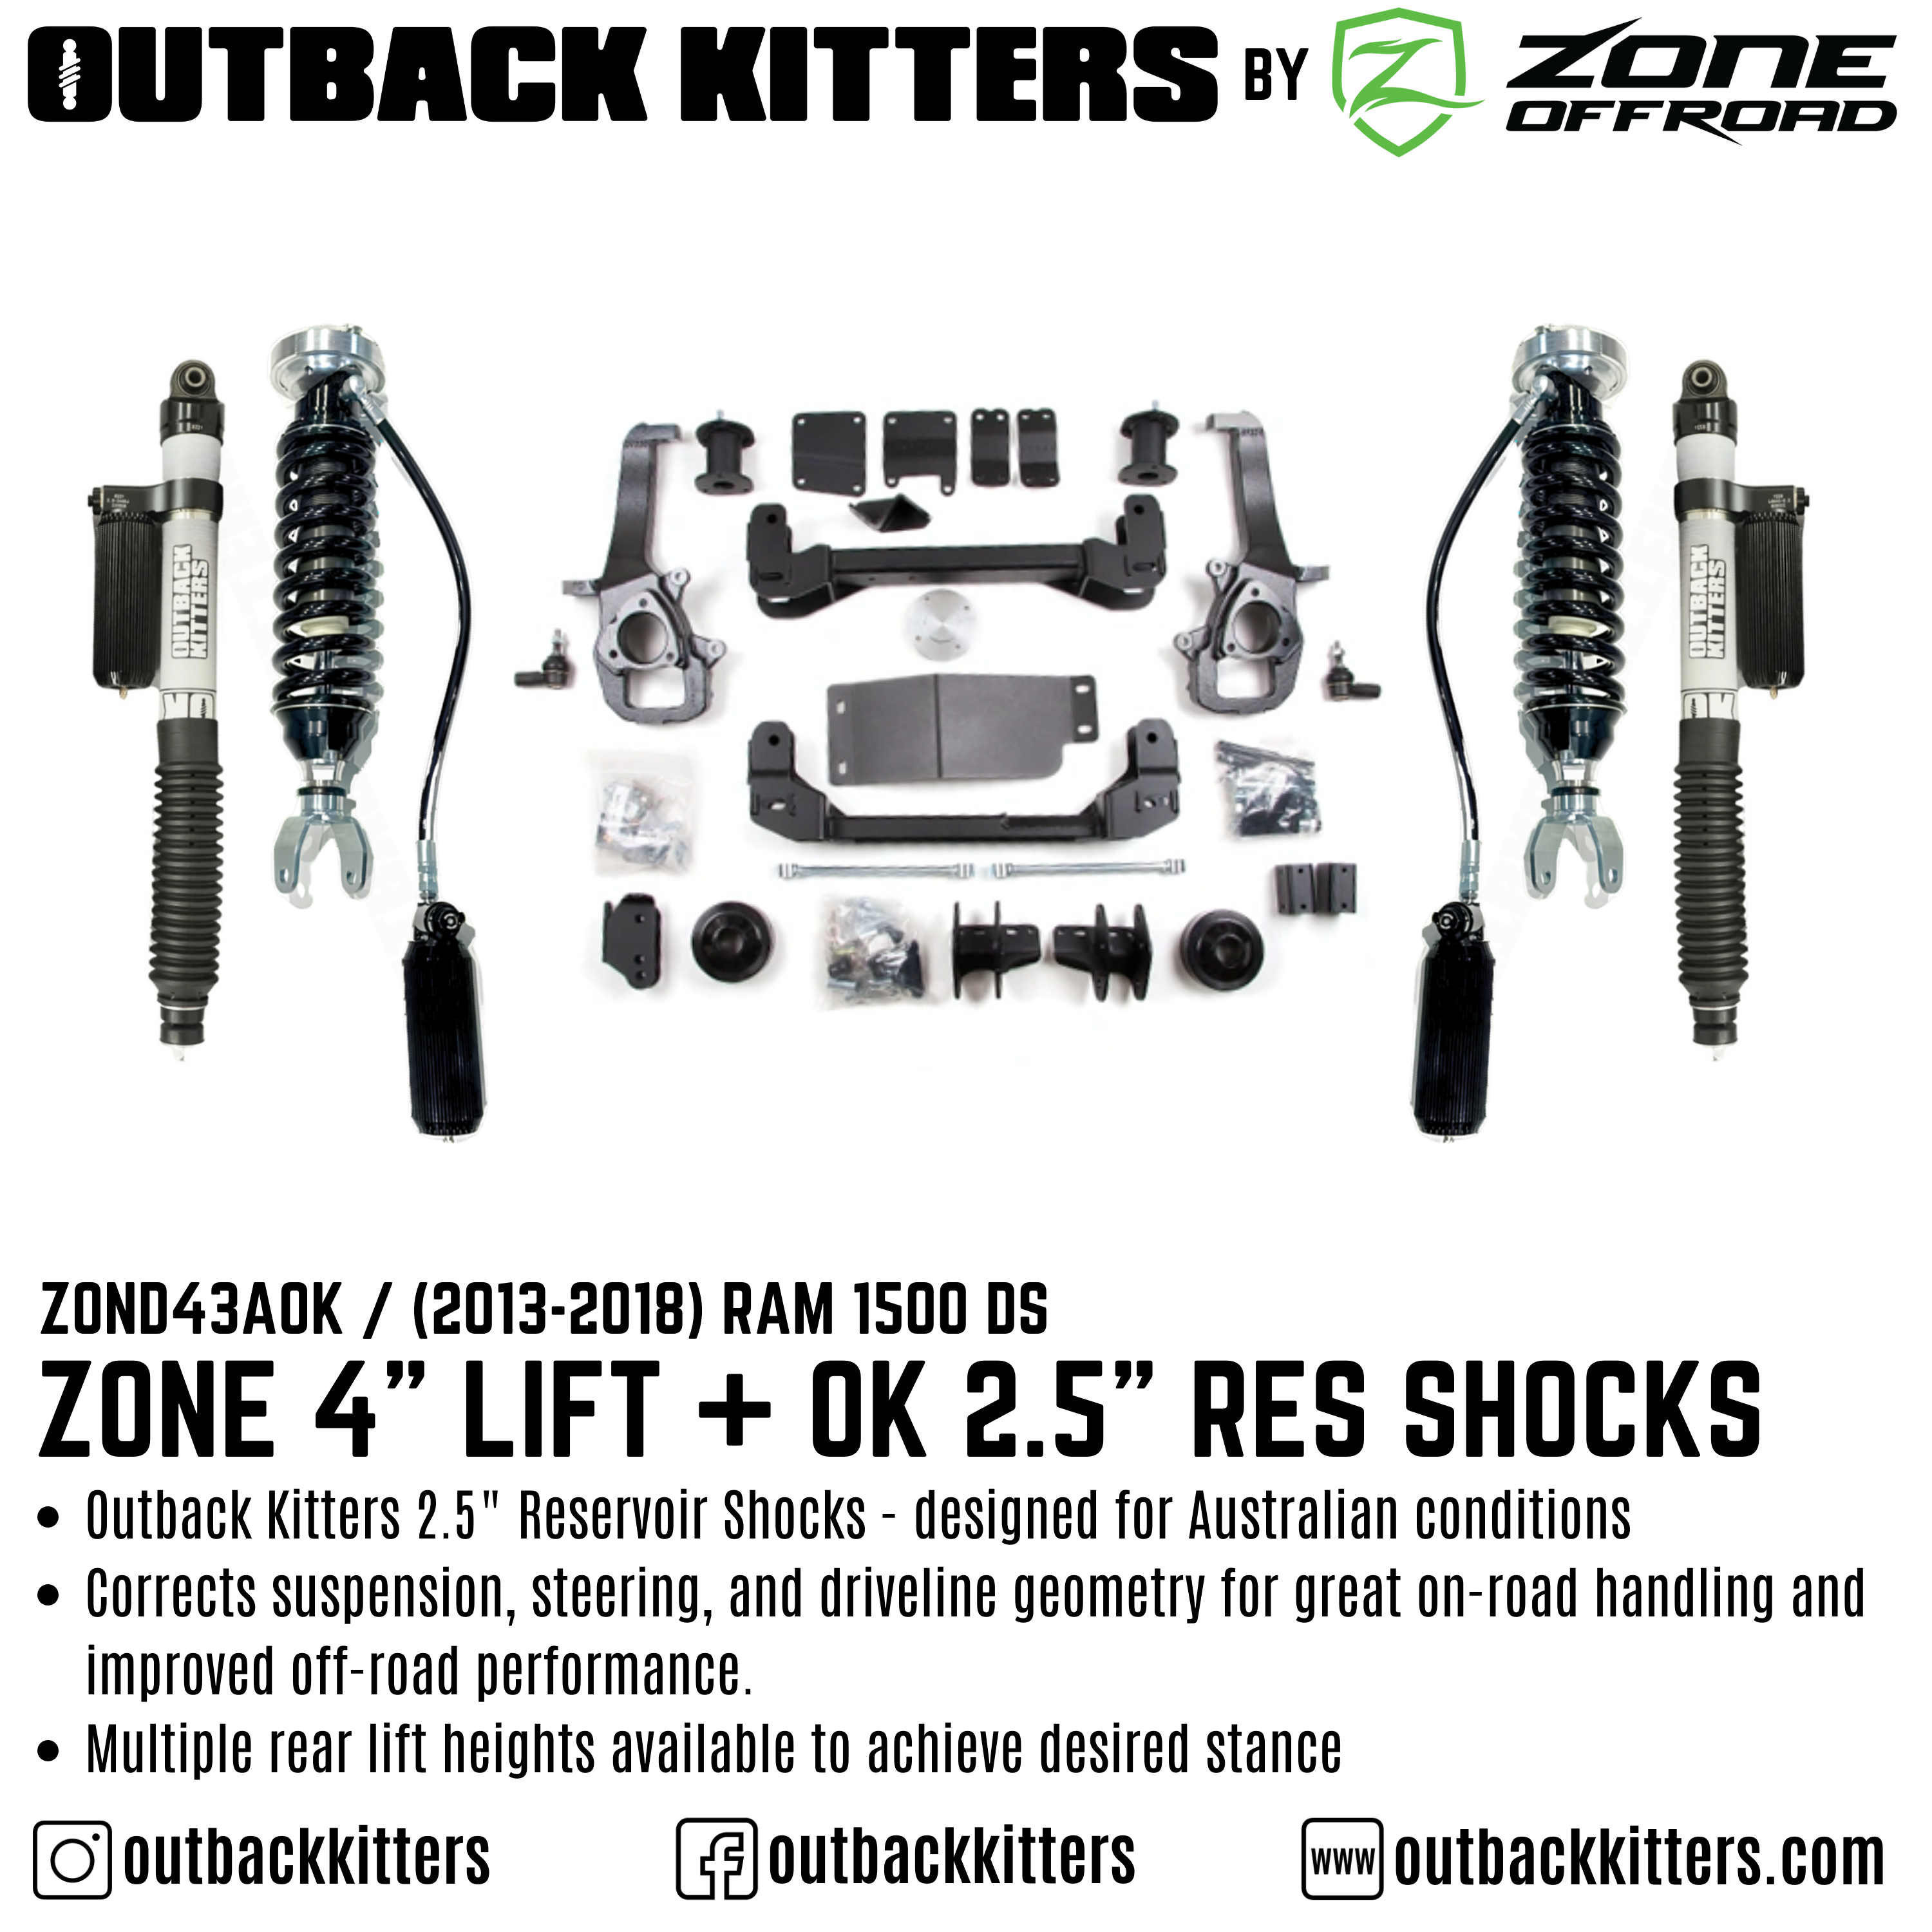 OK by Zone Offroad 4" Lift Kit for 2013-2018 Ram 1500 DS - Outback Kitters